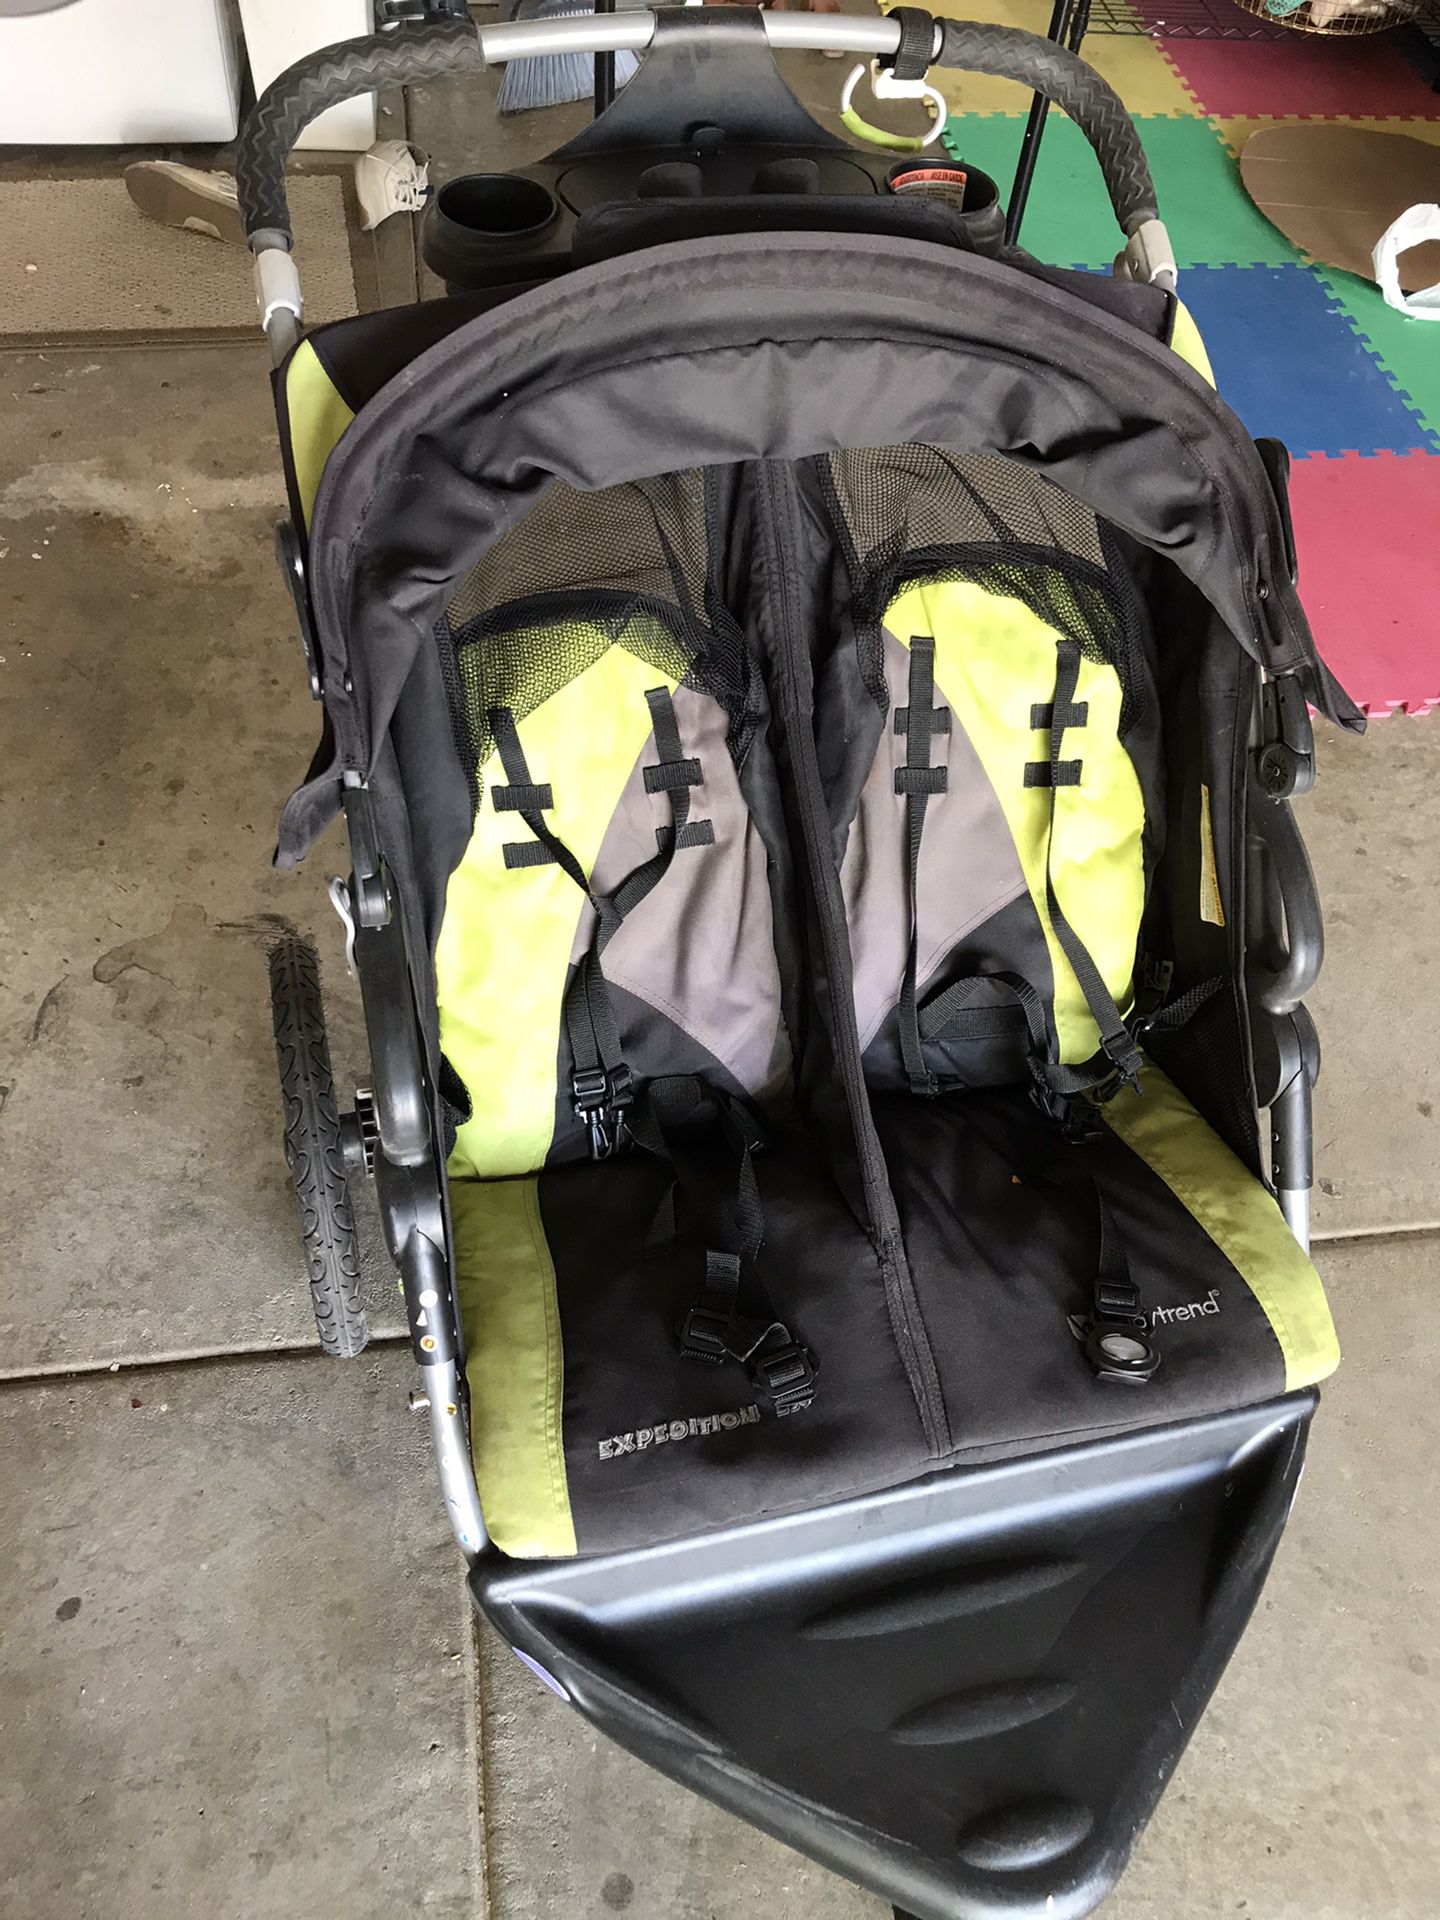 Stroller for two